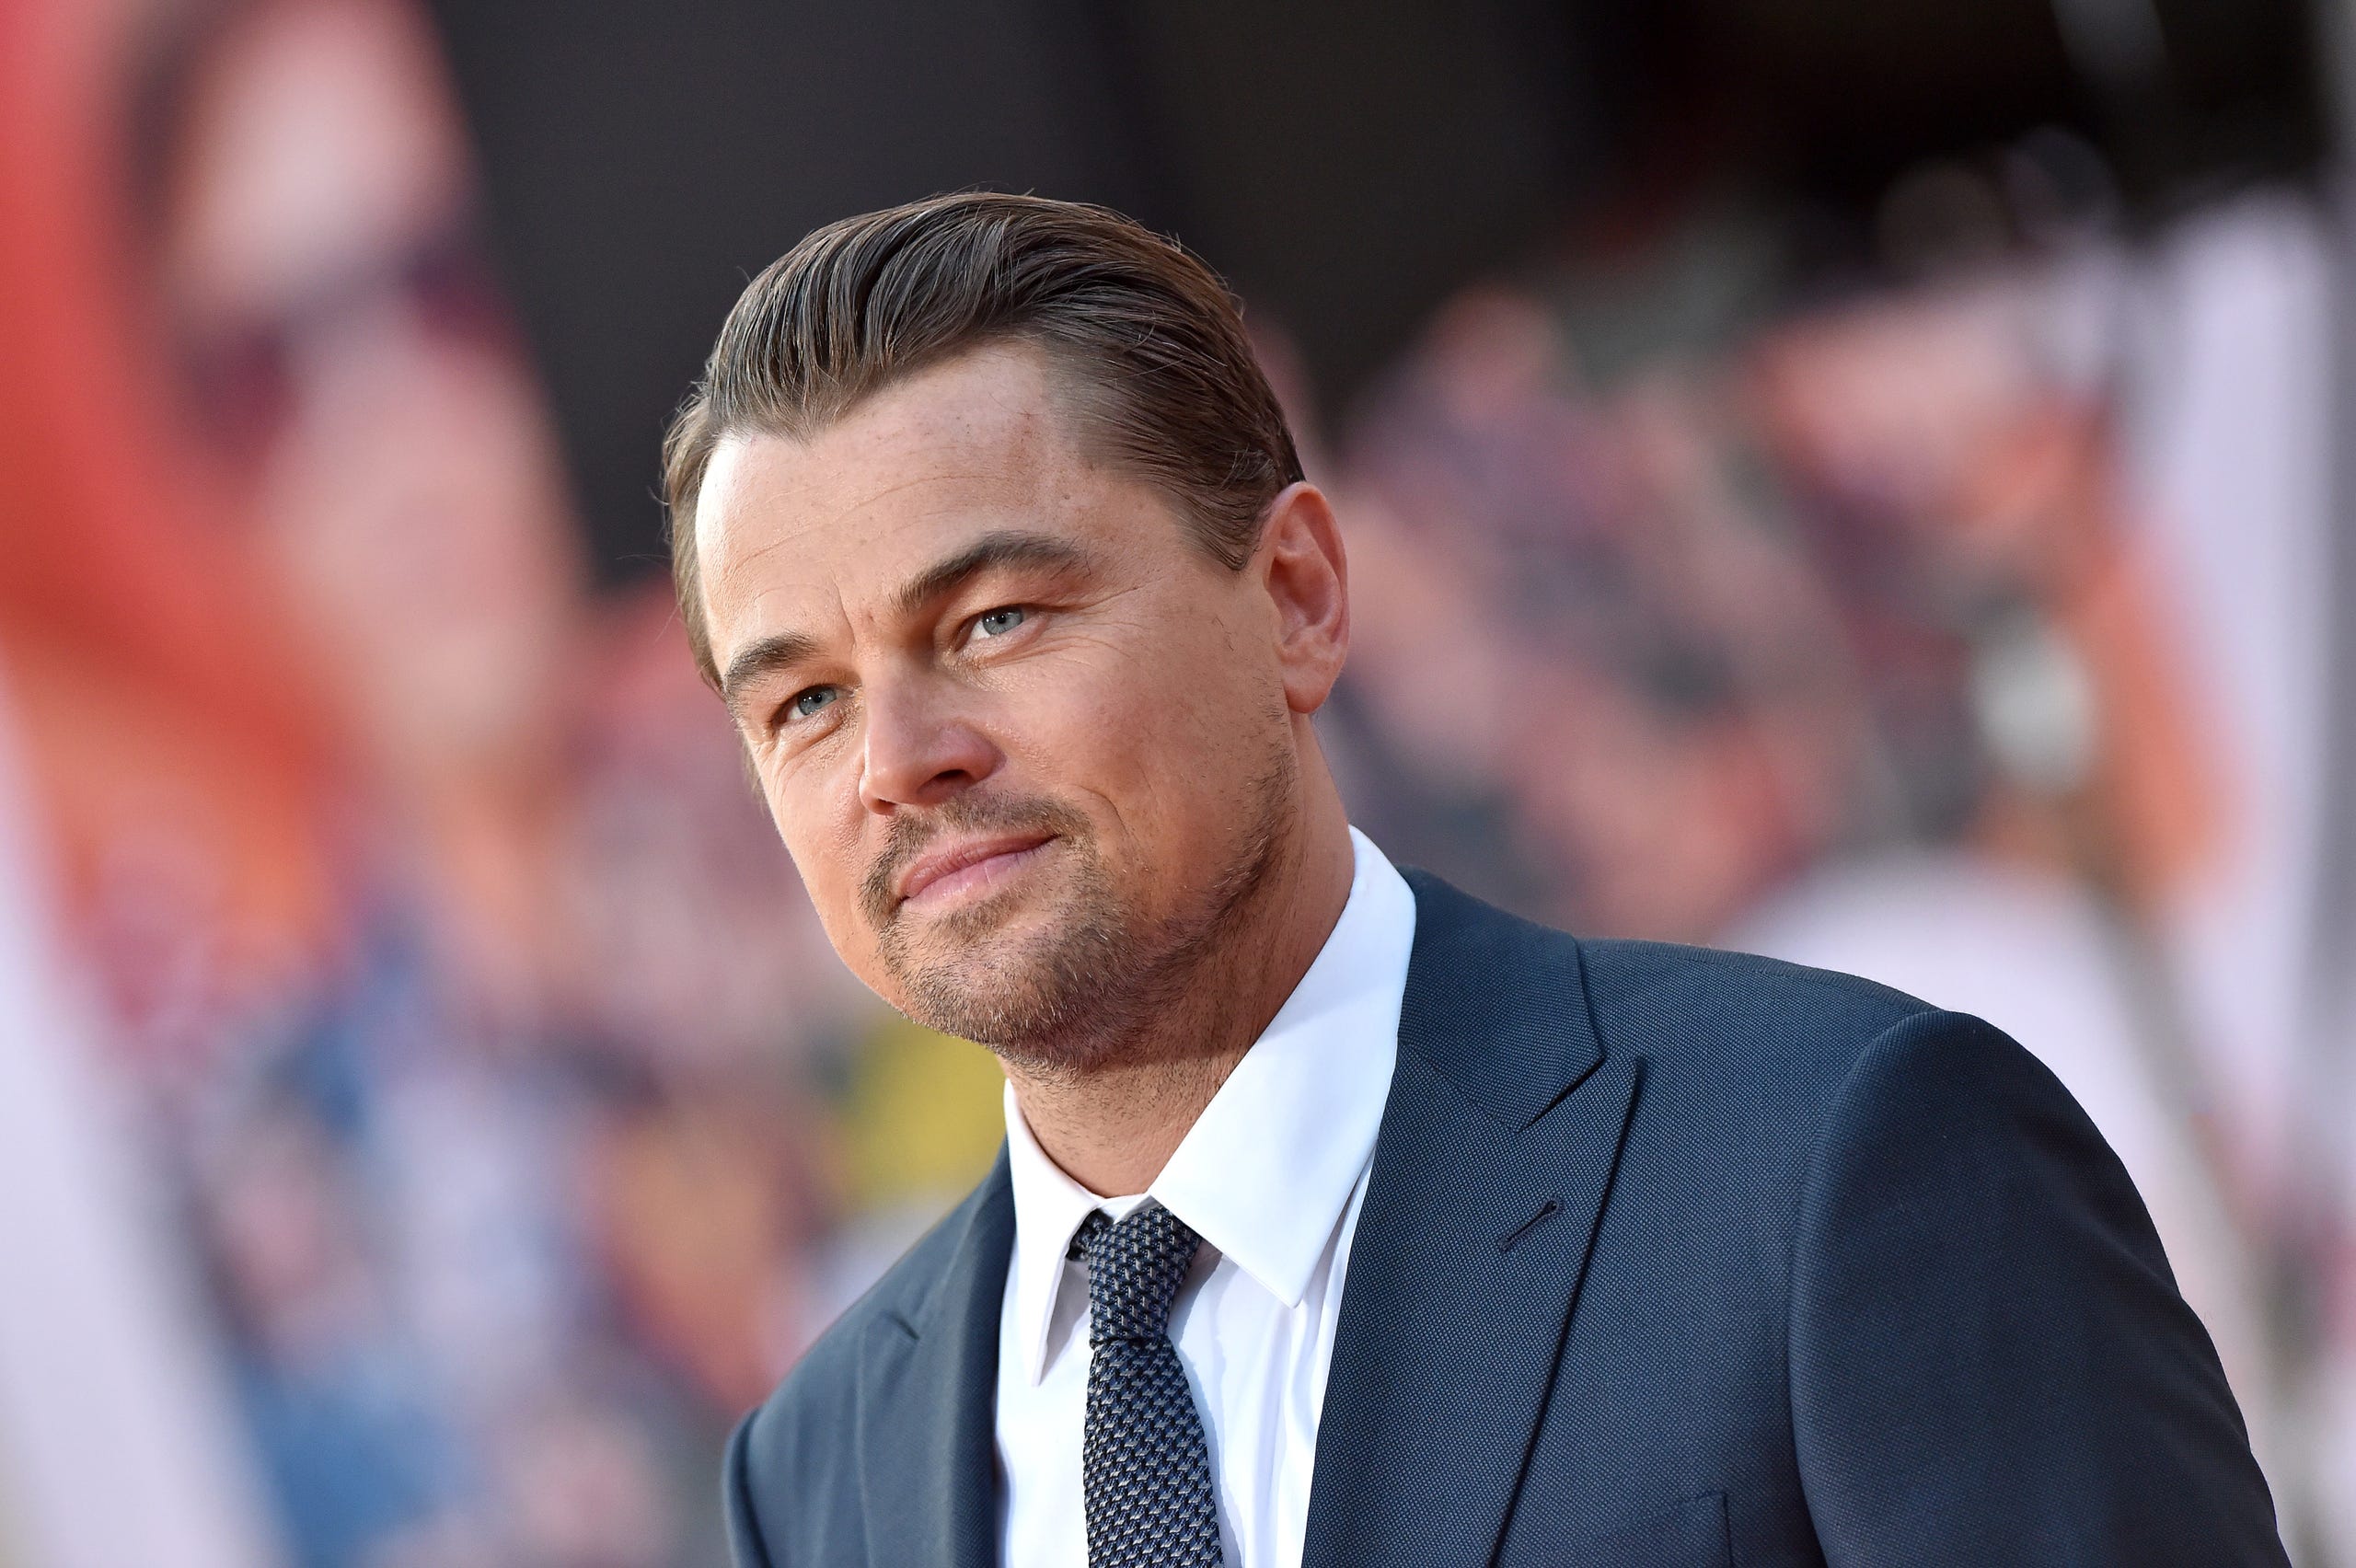 Leonardo DiCaprio donated $10 million to the Armed Forces of Ukraine